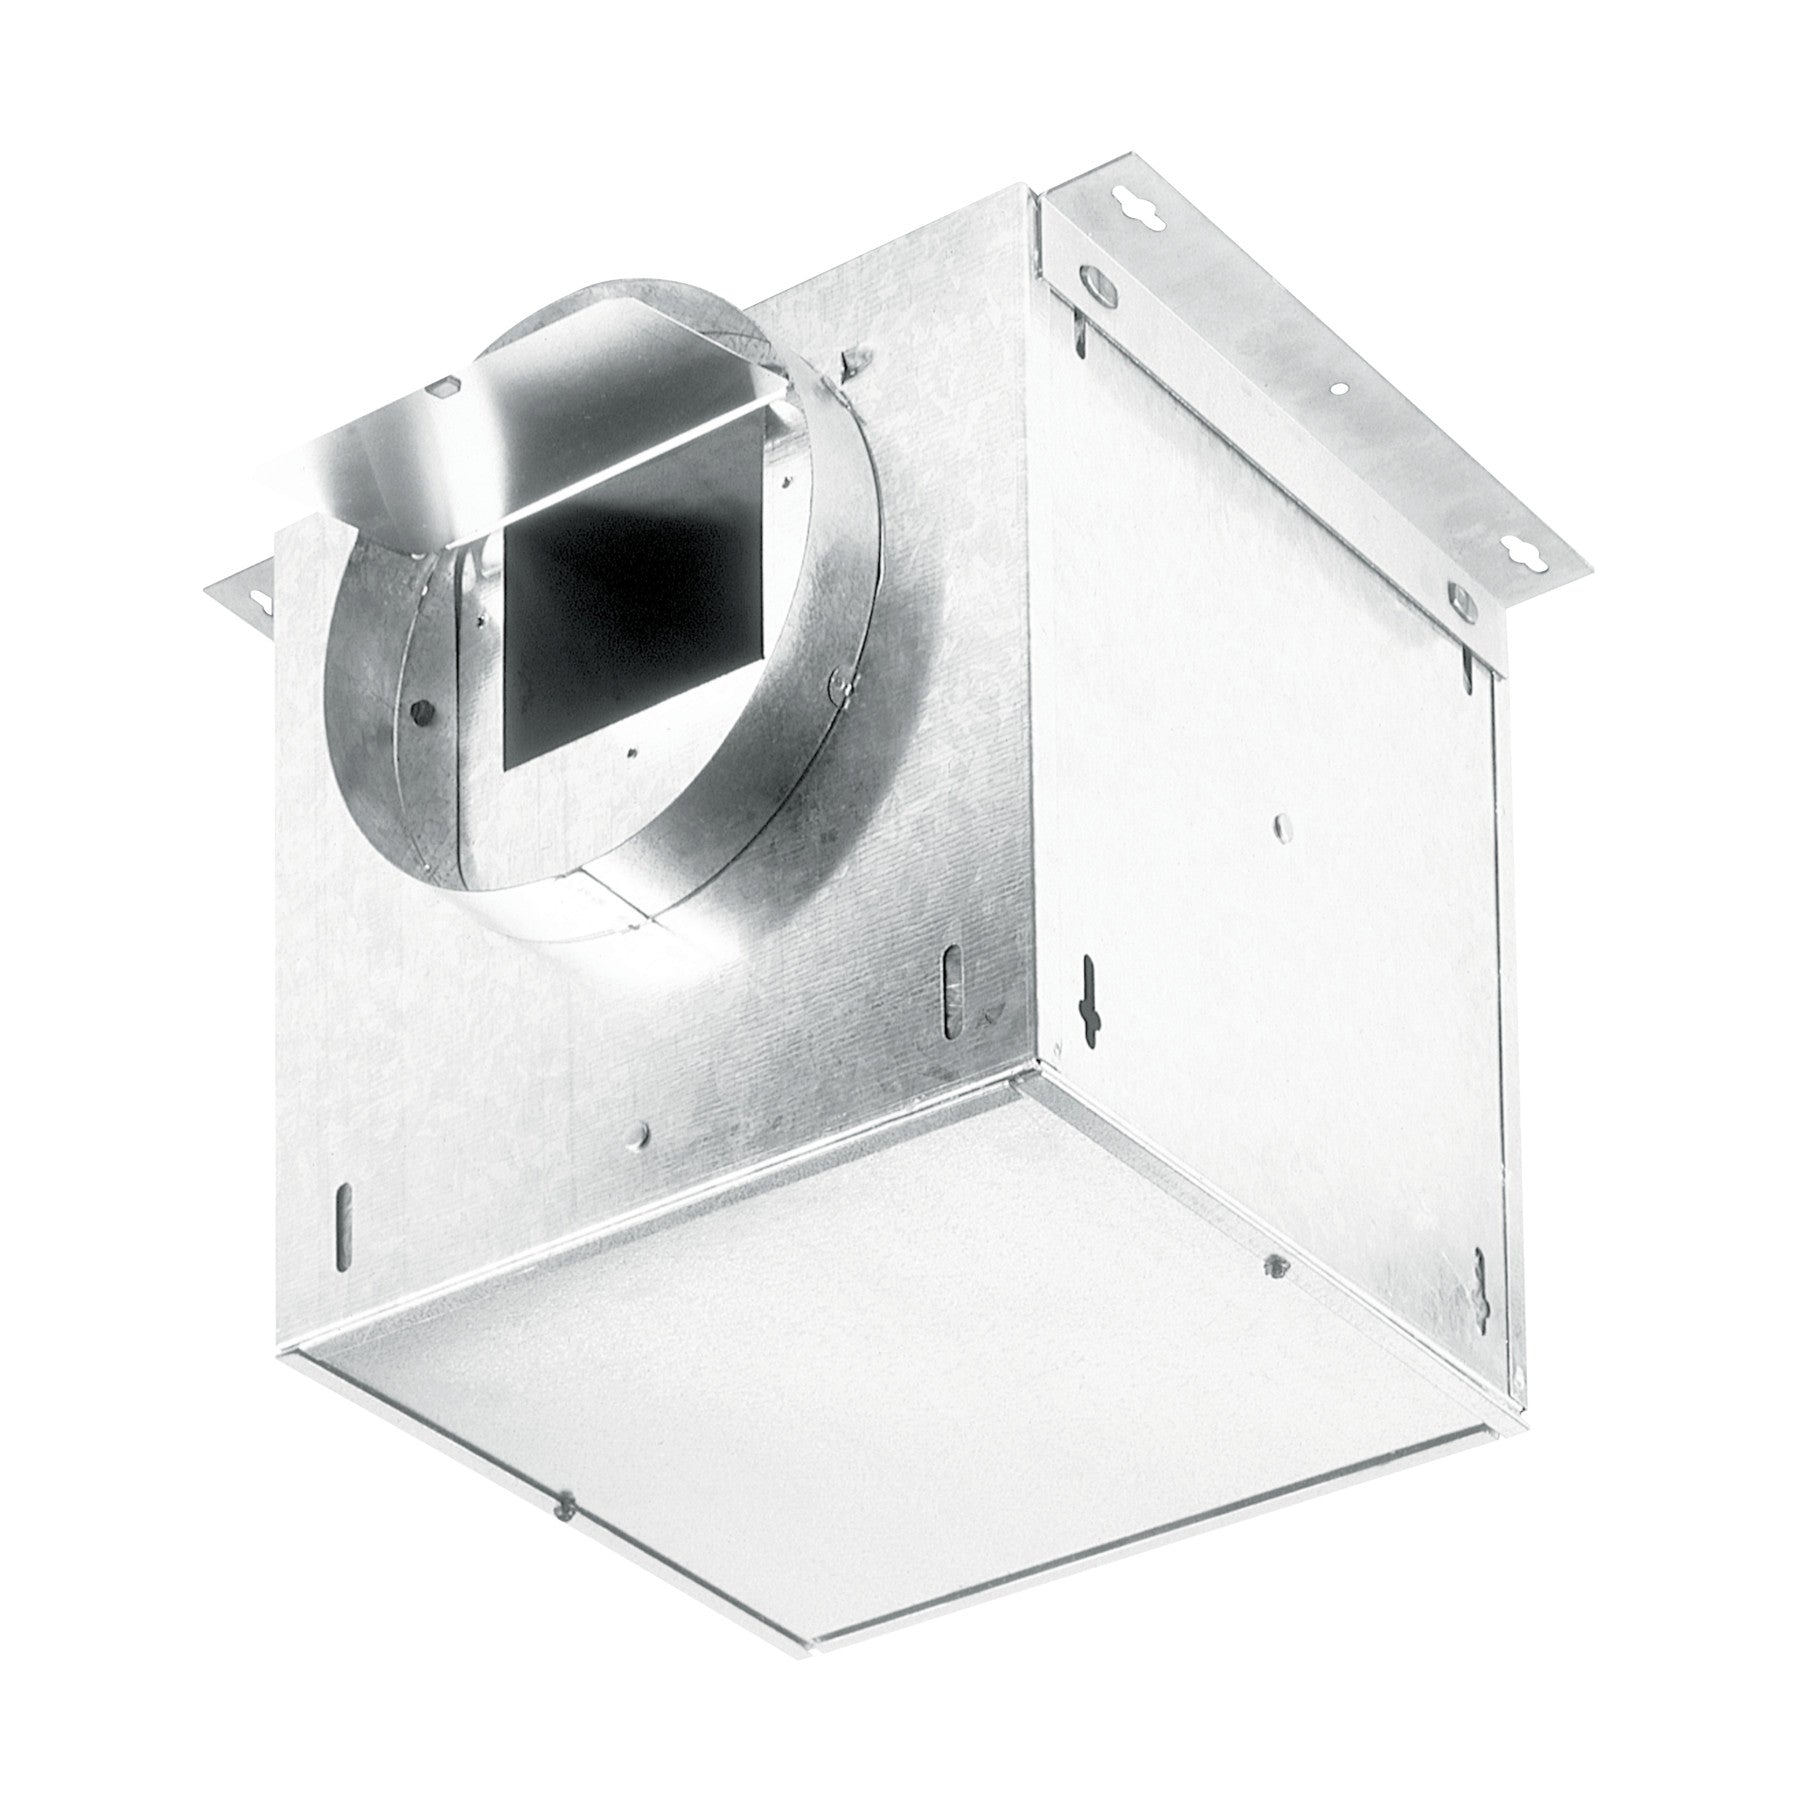 Broan - 12.25 Inch 280 CFM Blower & Insert Vent in Stainless - HLB3